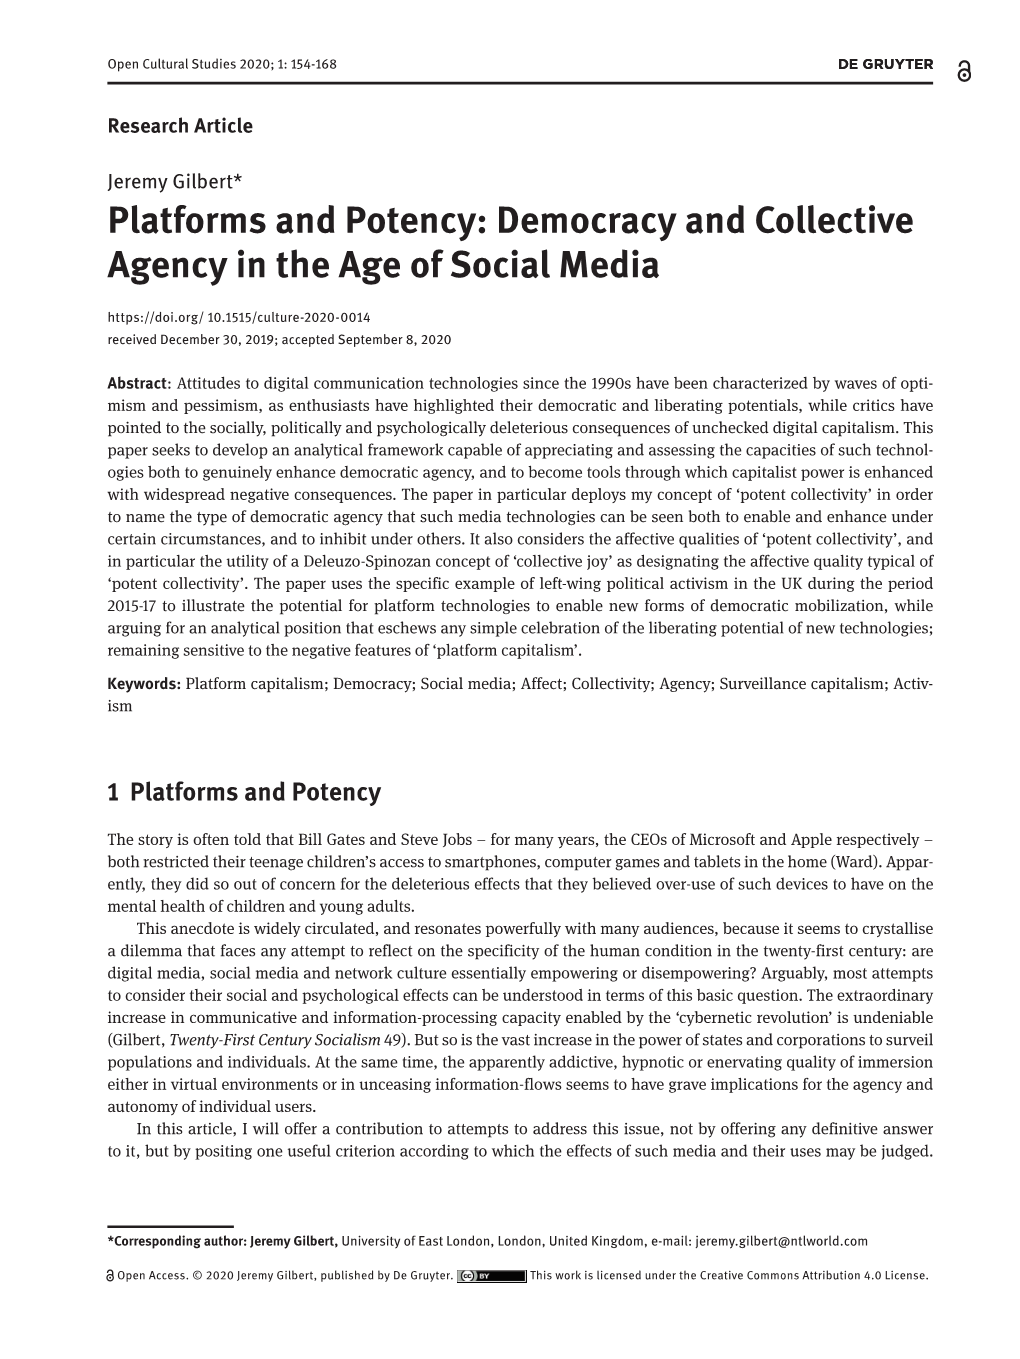 Platforms and Potency: Democracy and Collective Agency in the Age Of